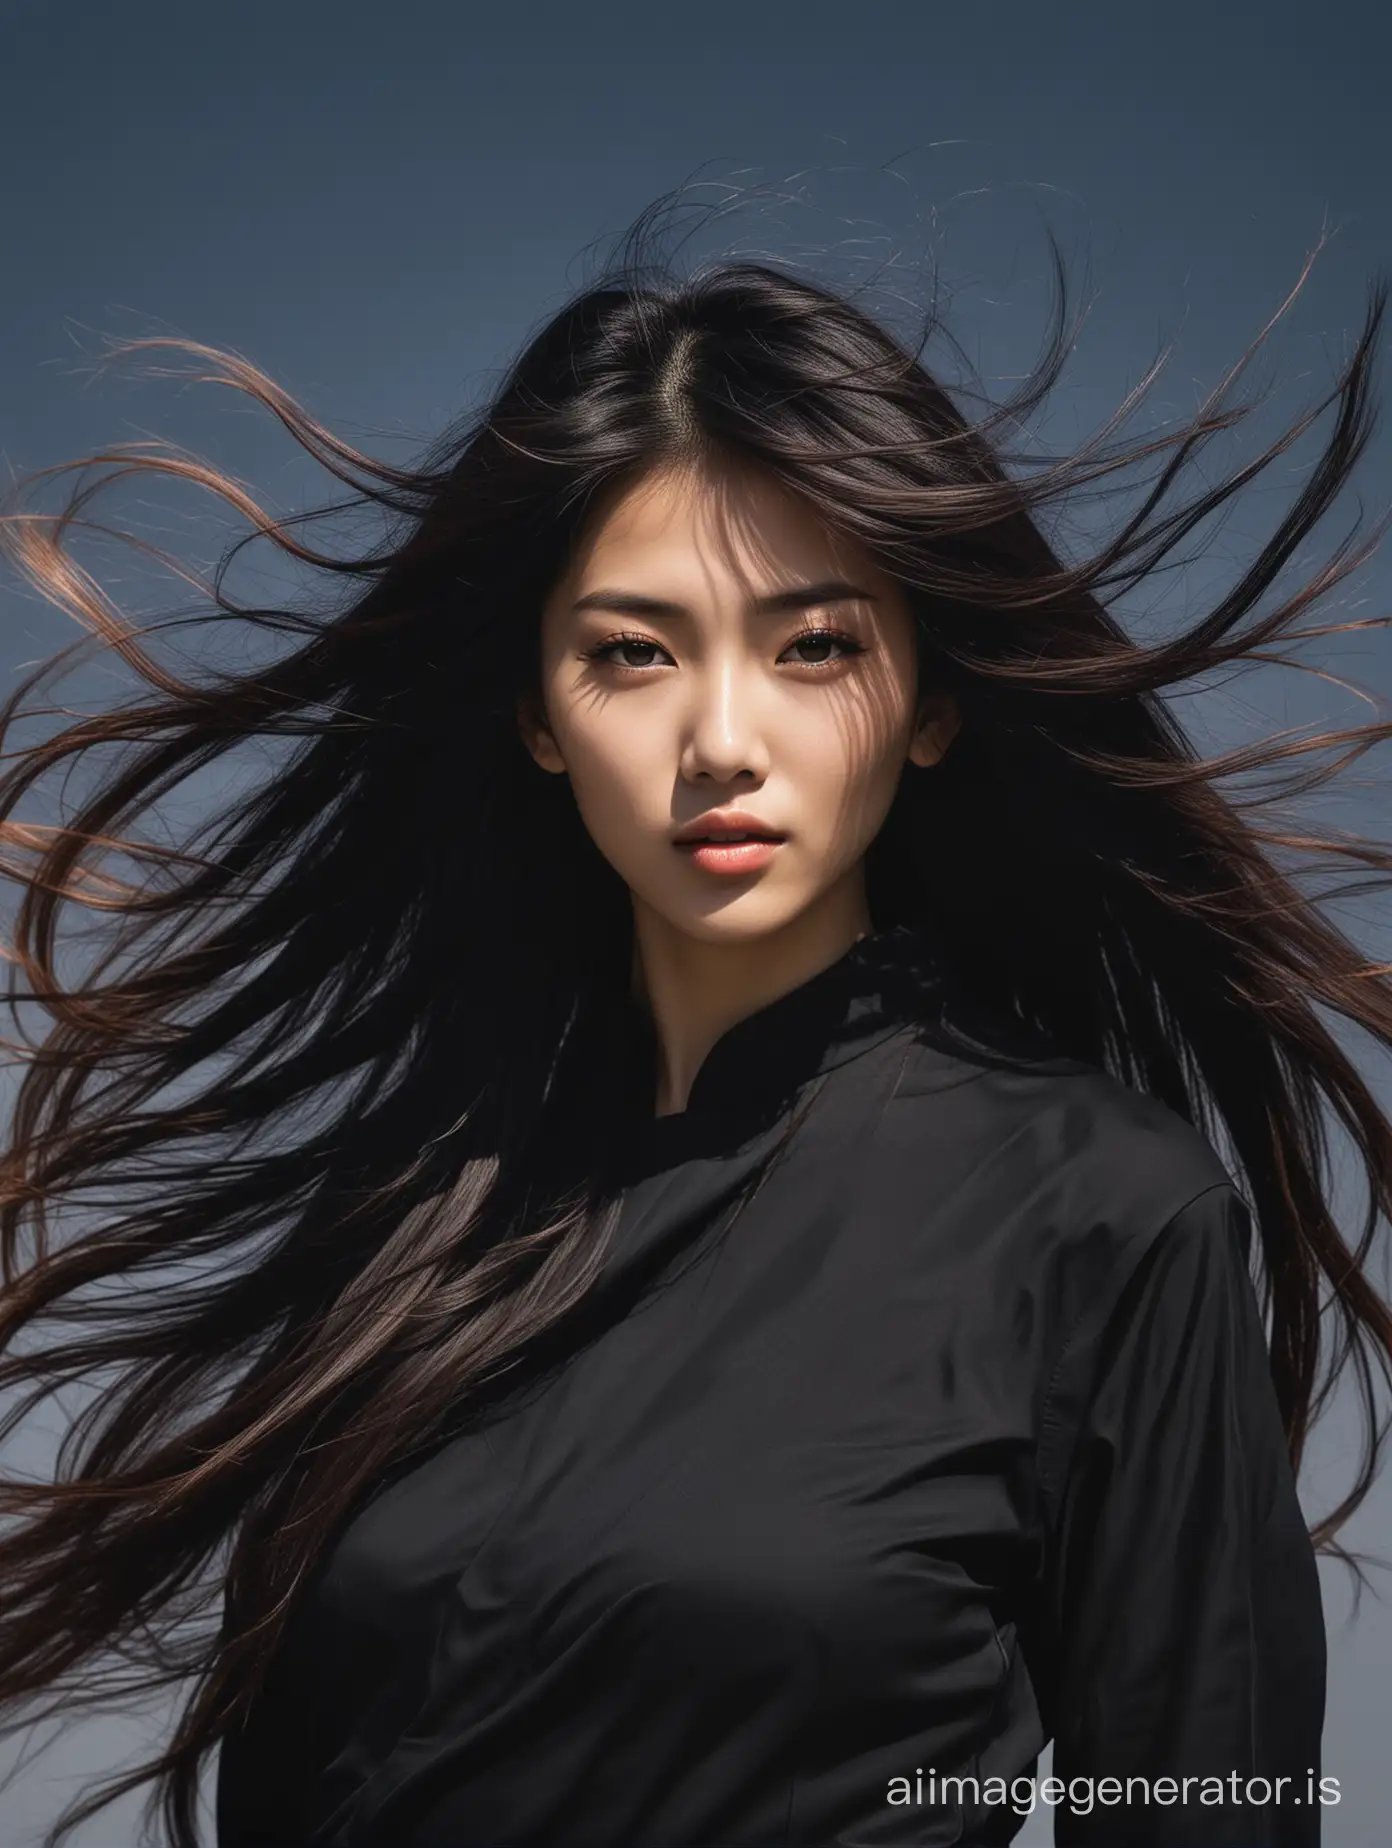 oriental 2024 woman aura epitome of beauty color high contrast black clothes full head portrait
wind blowing hair
